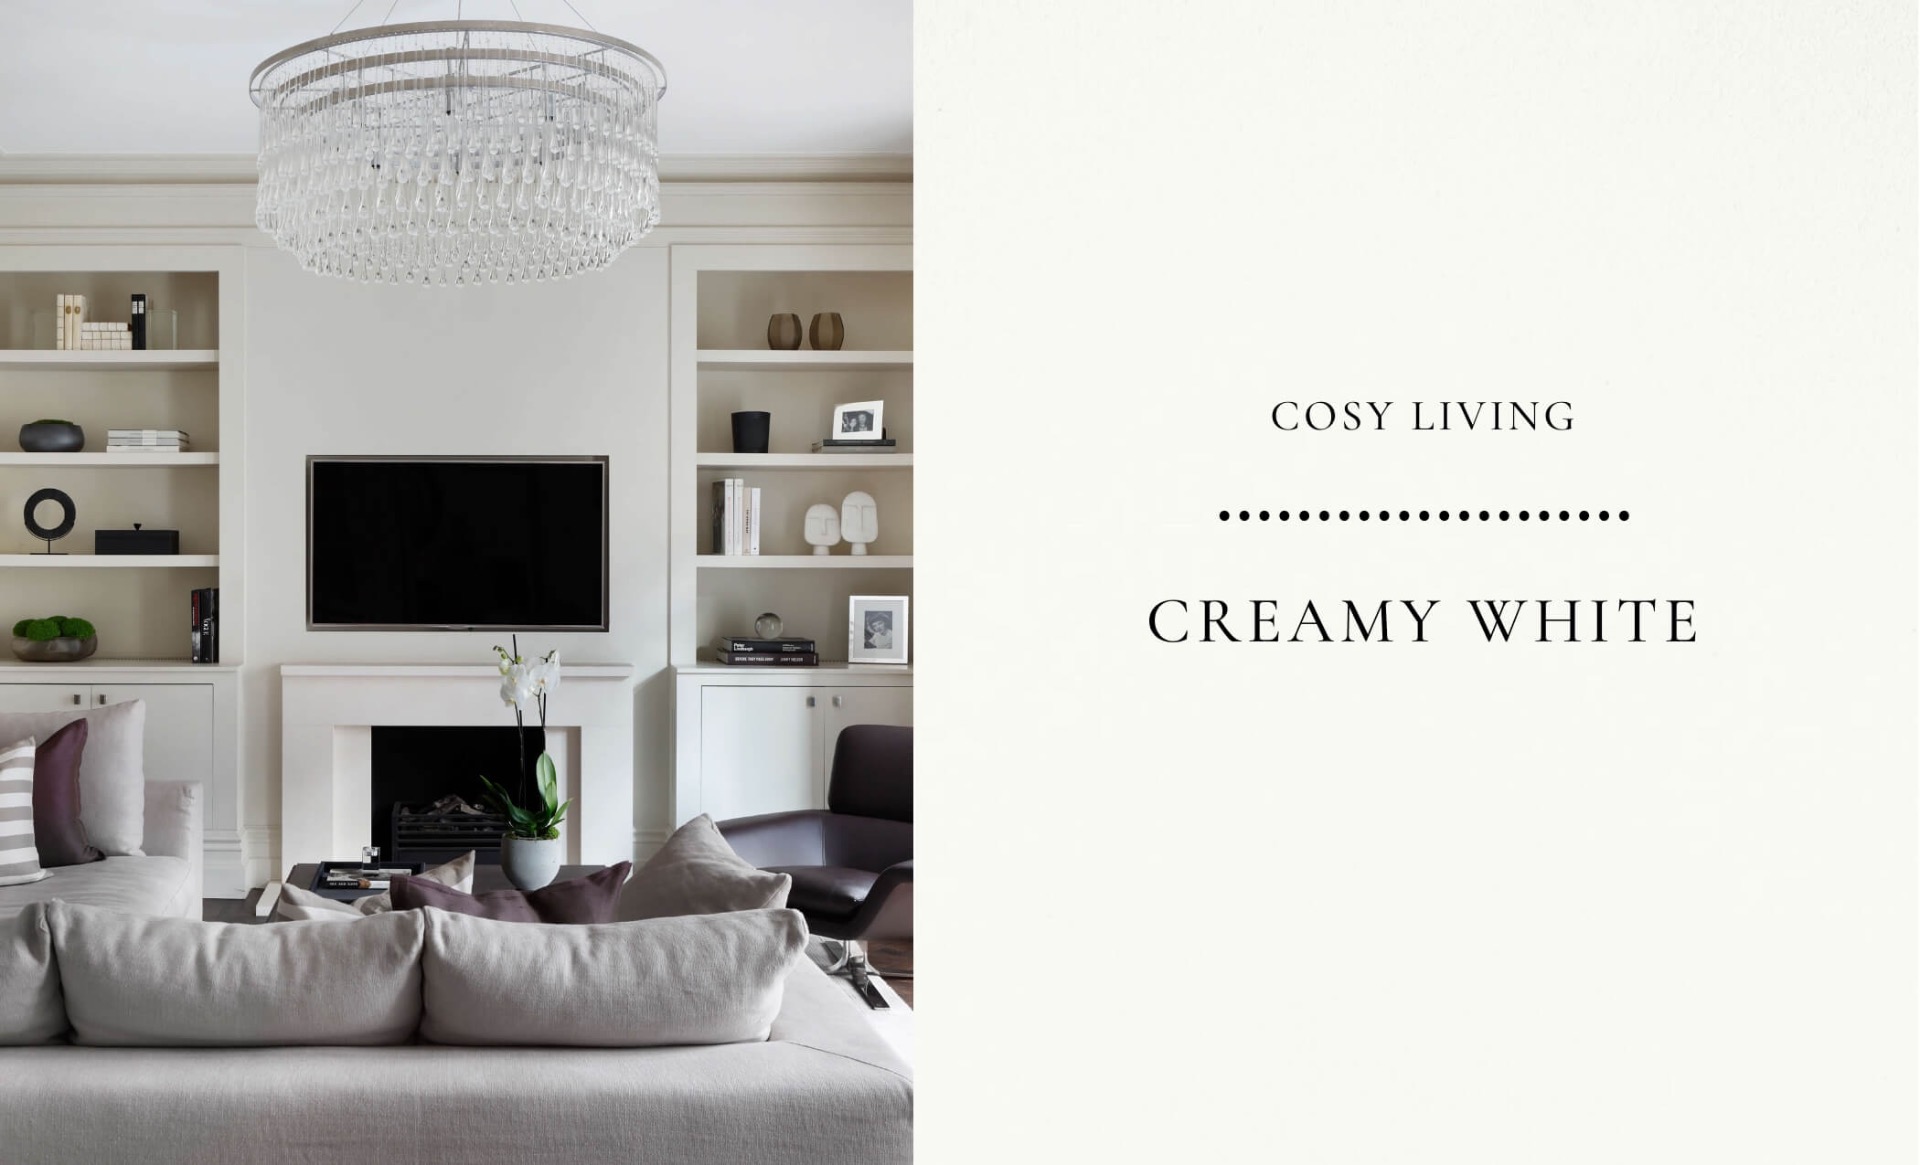 Creamy white paint for living room walls